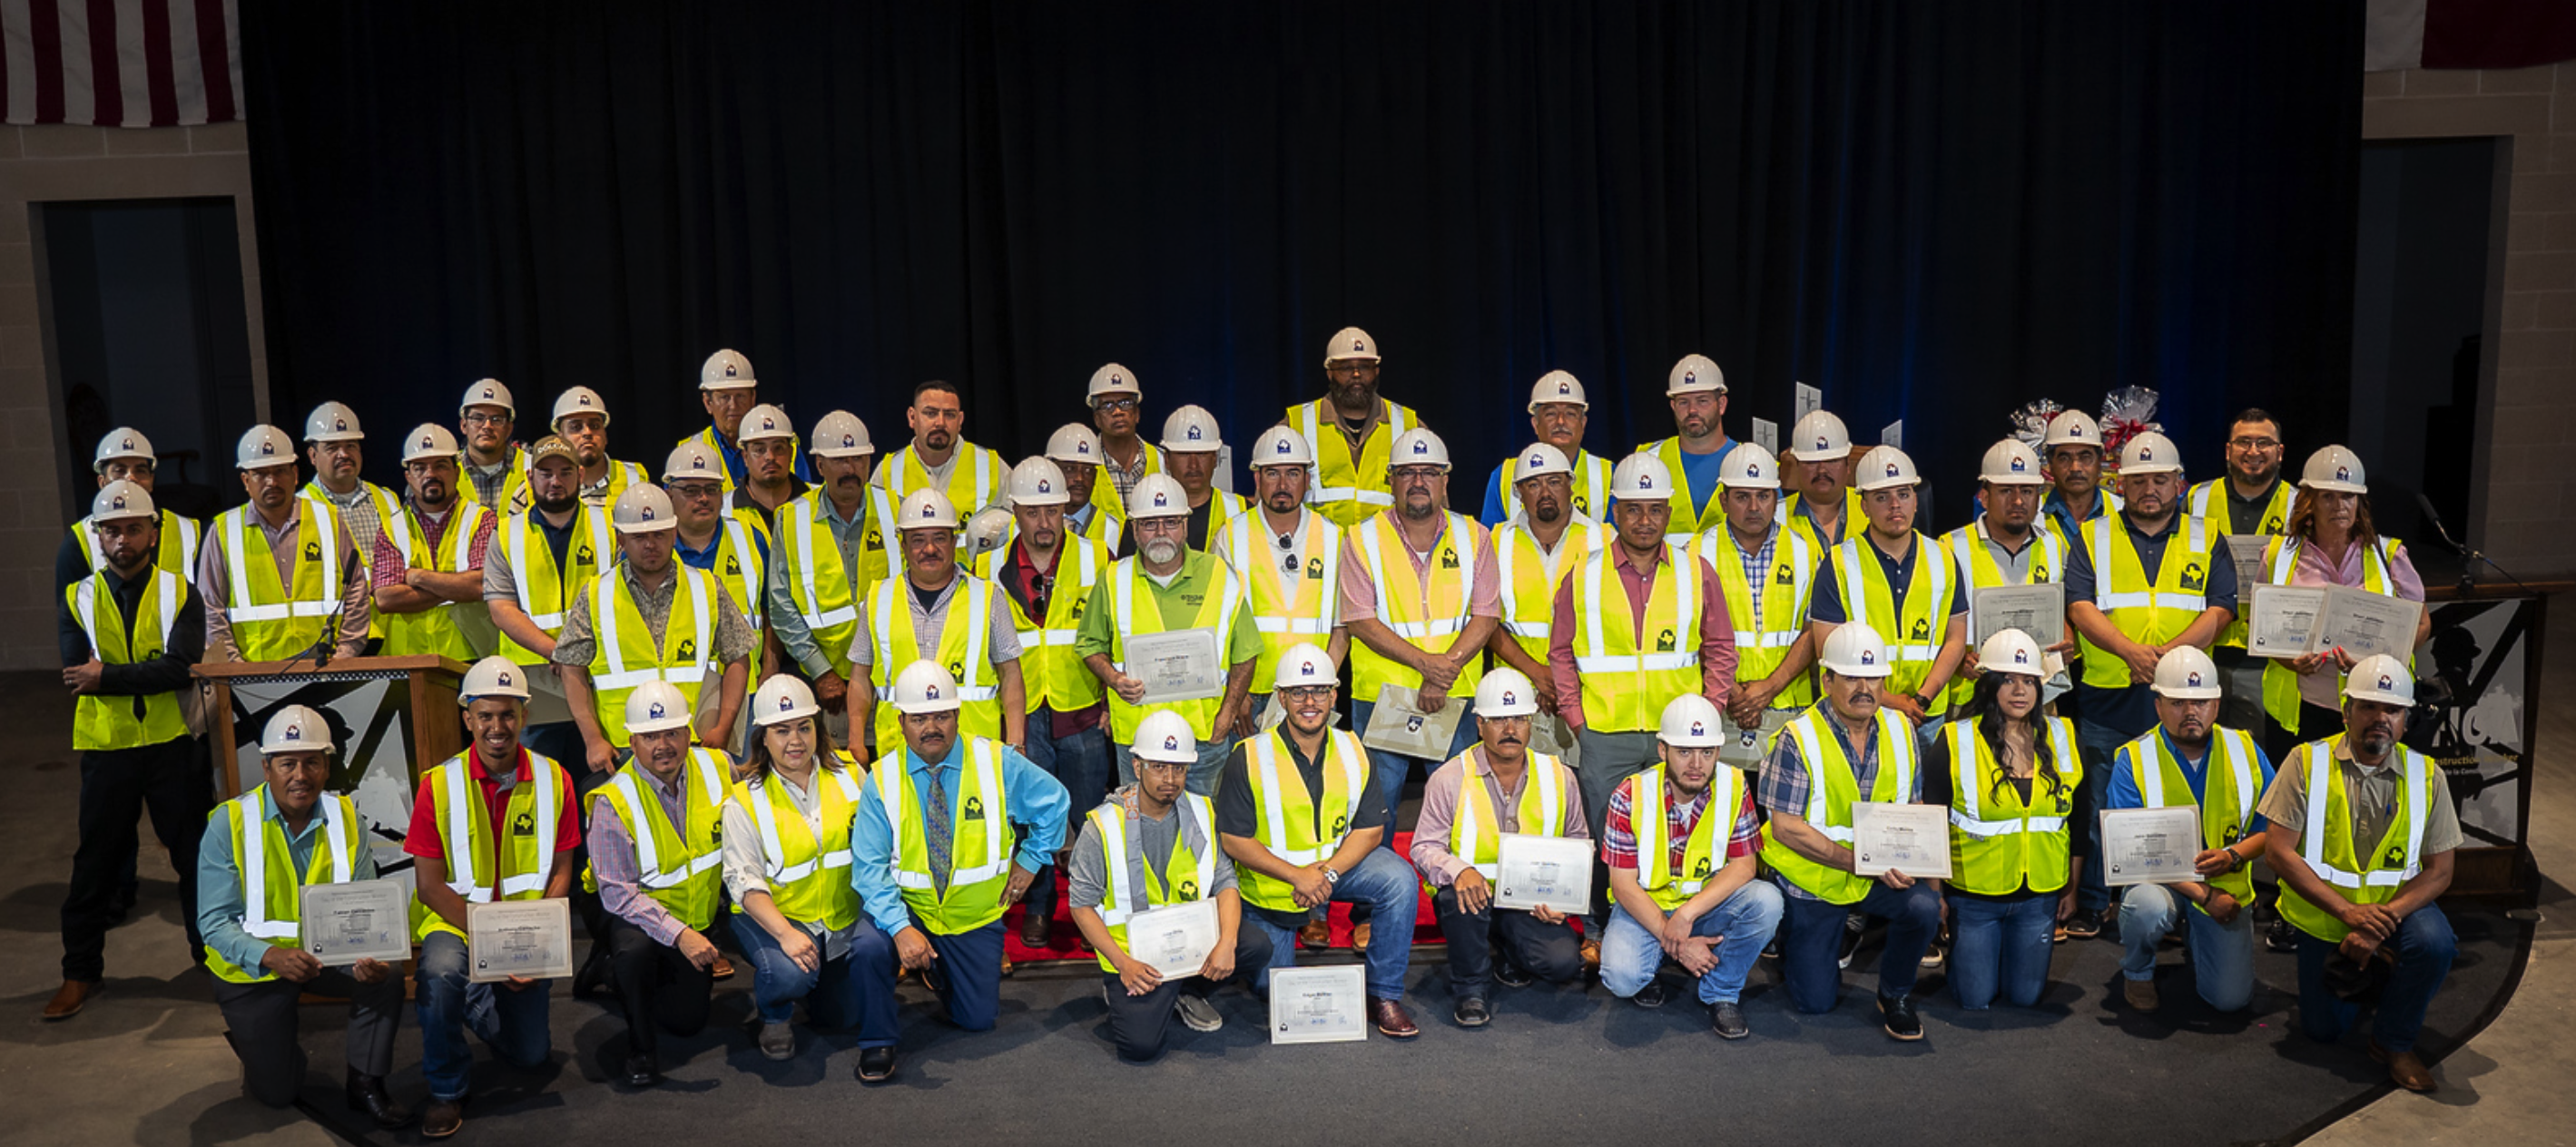 Group photo of construction workers